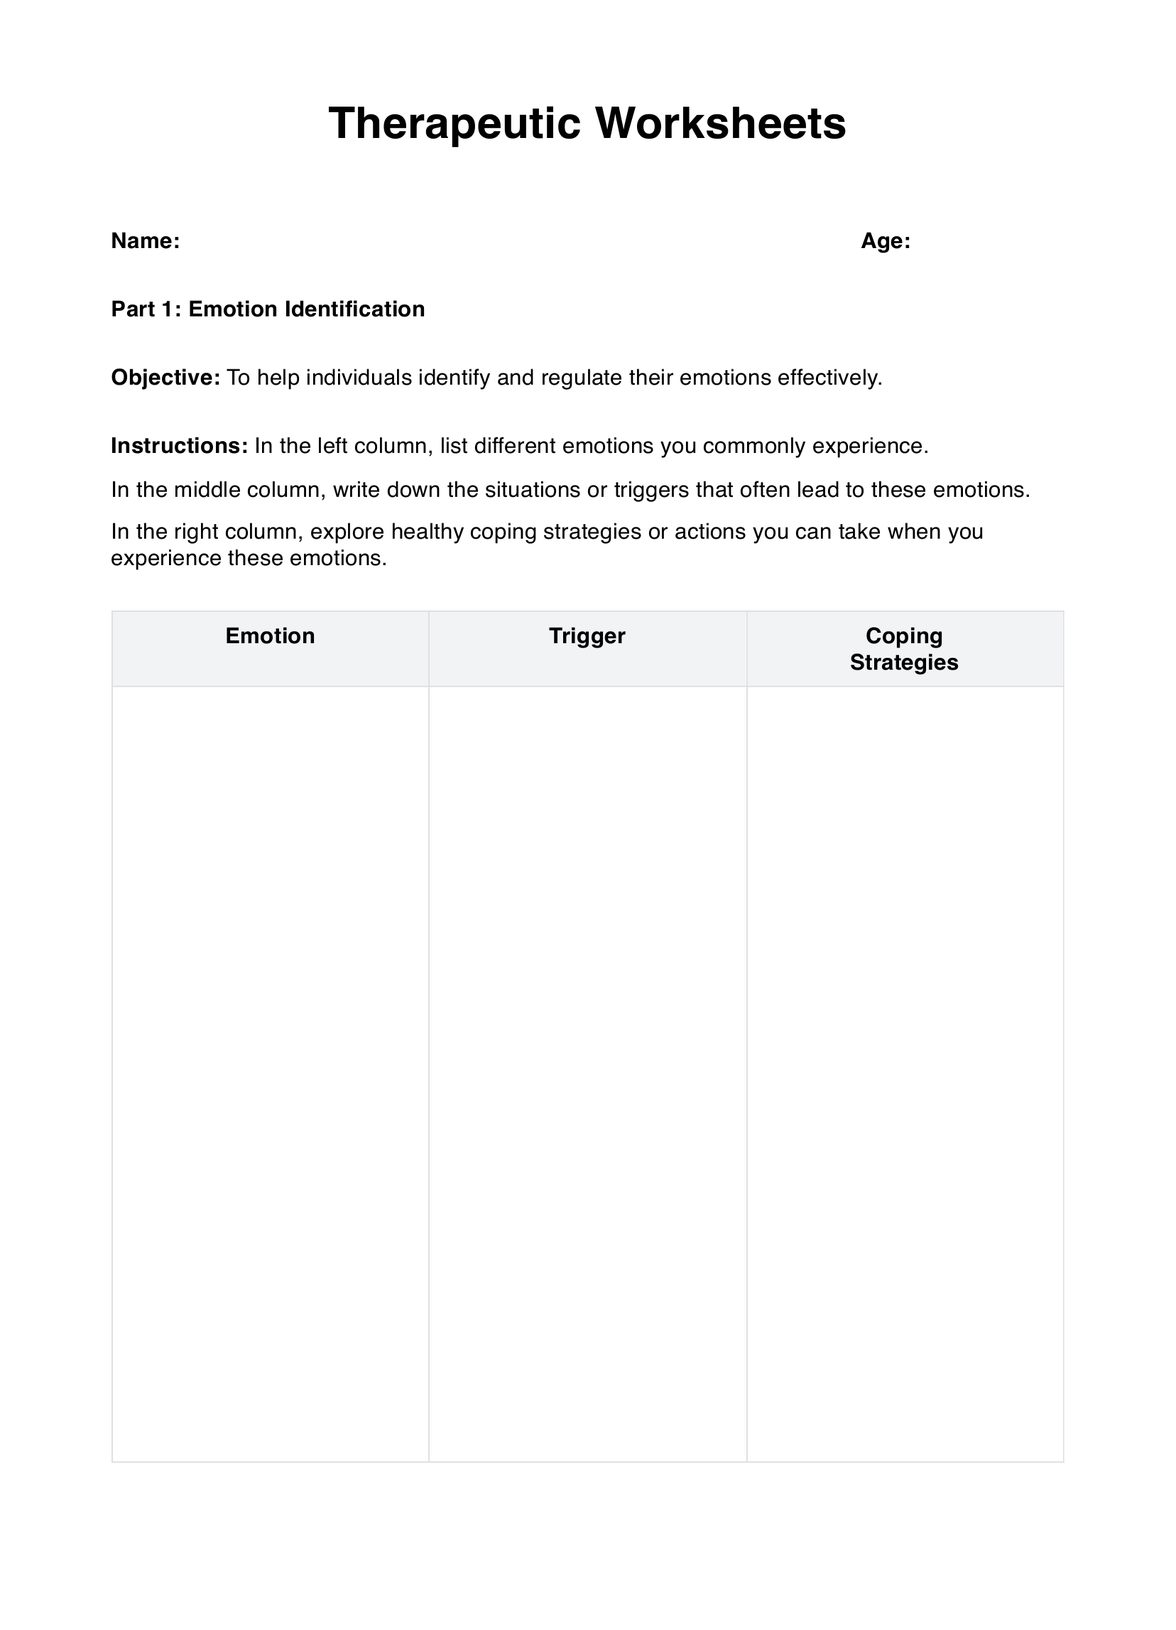 Therapeutic Worksheets PDF Example